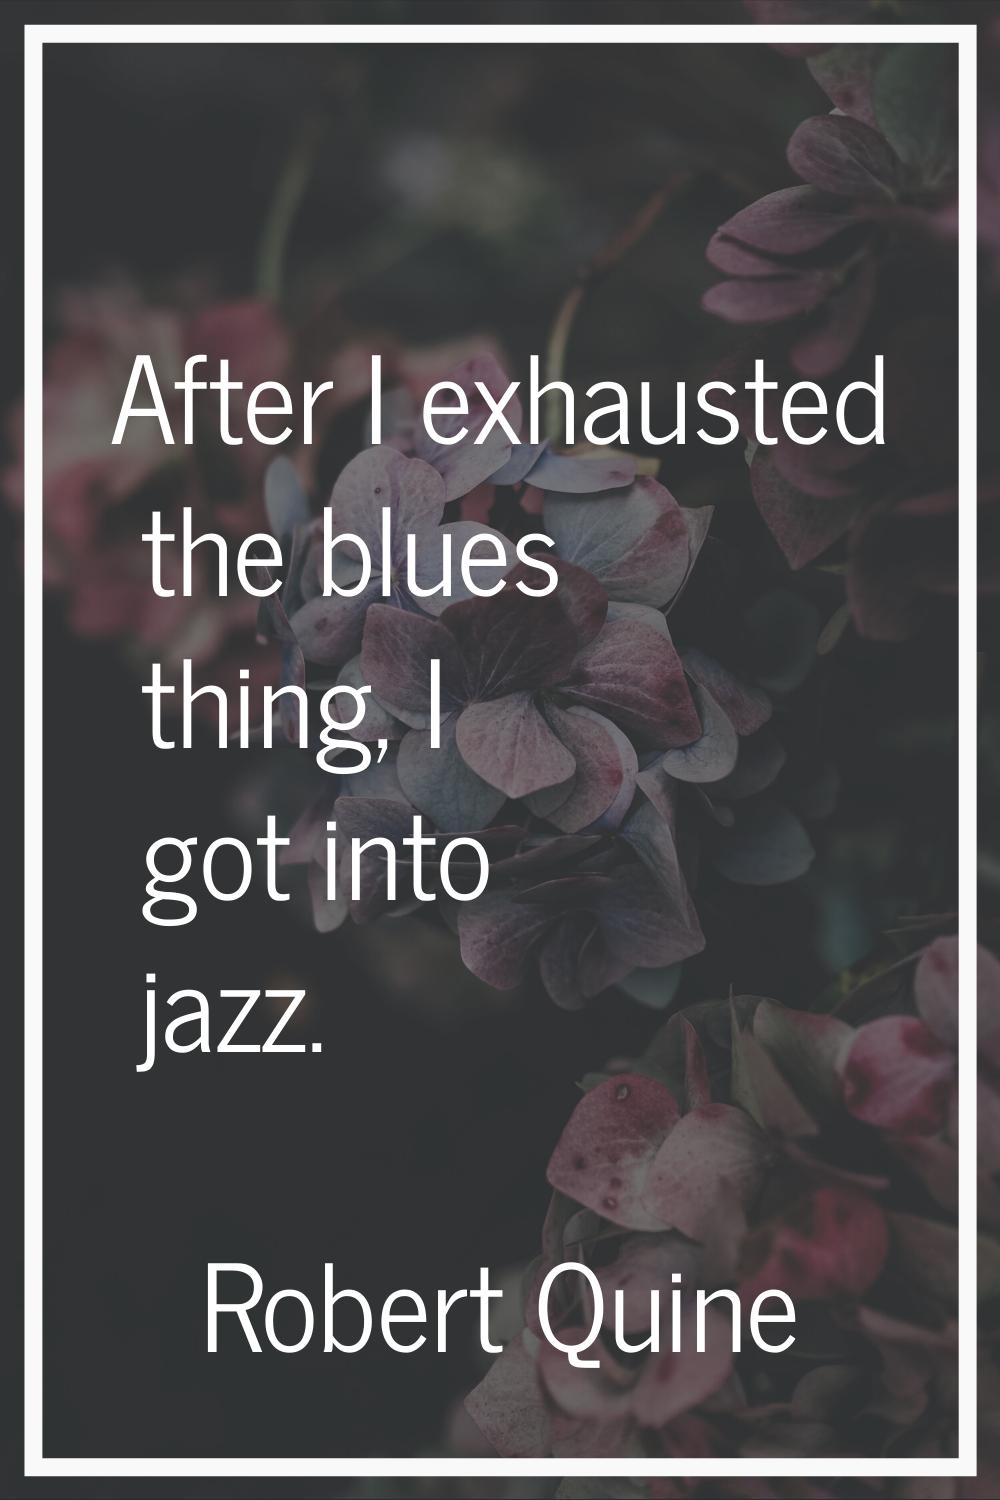 After I exhausted the blues thing, I got into jazz.